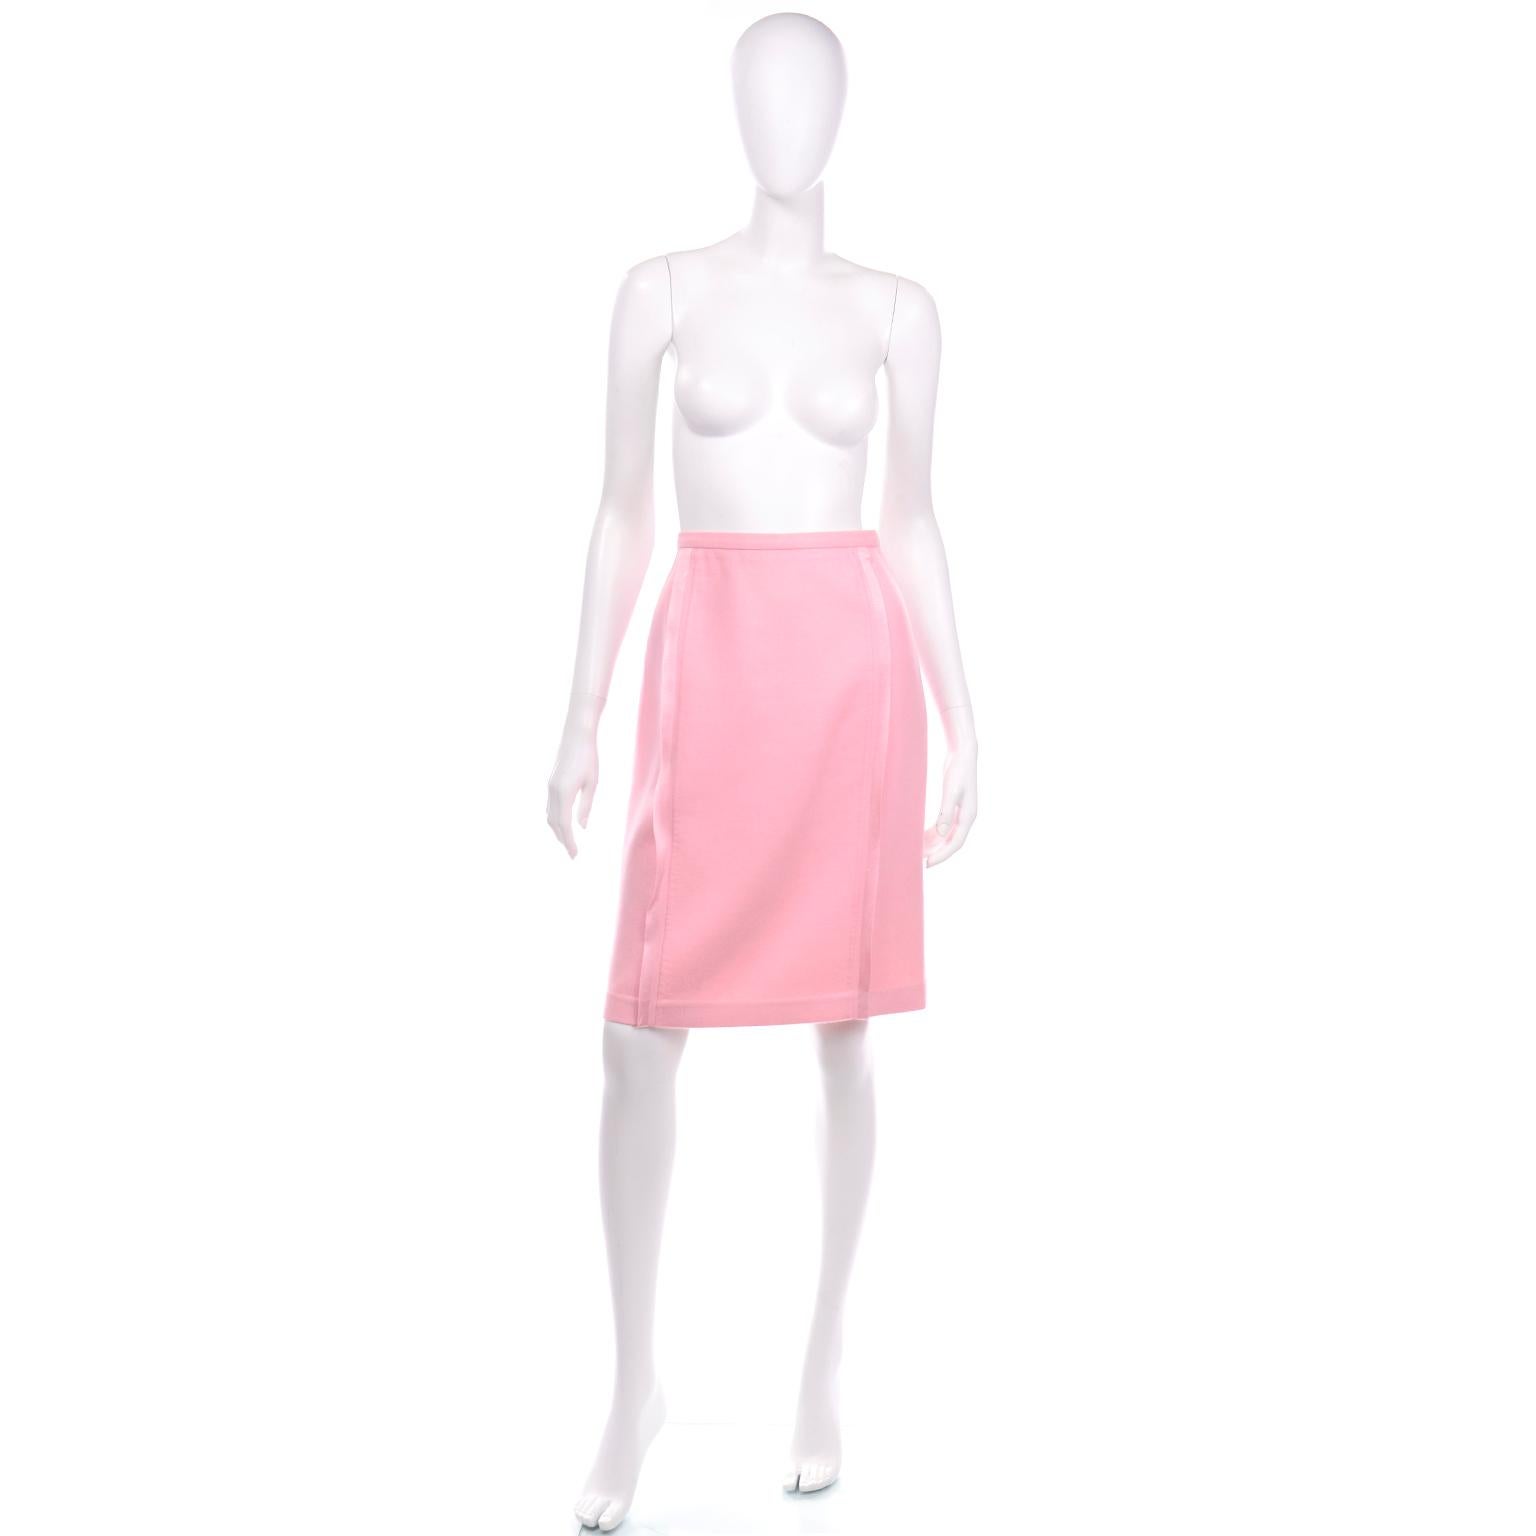 This gorgeous Oscar de la Renta skirt is made from a high quality  pink worsted cashmere with silk knit detail trim. This classic pencil style skirt is unlined and feels so luxurious! You can wear this with a blouse, sweater, or tank with a jacket.